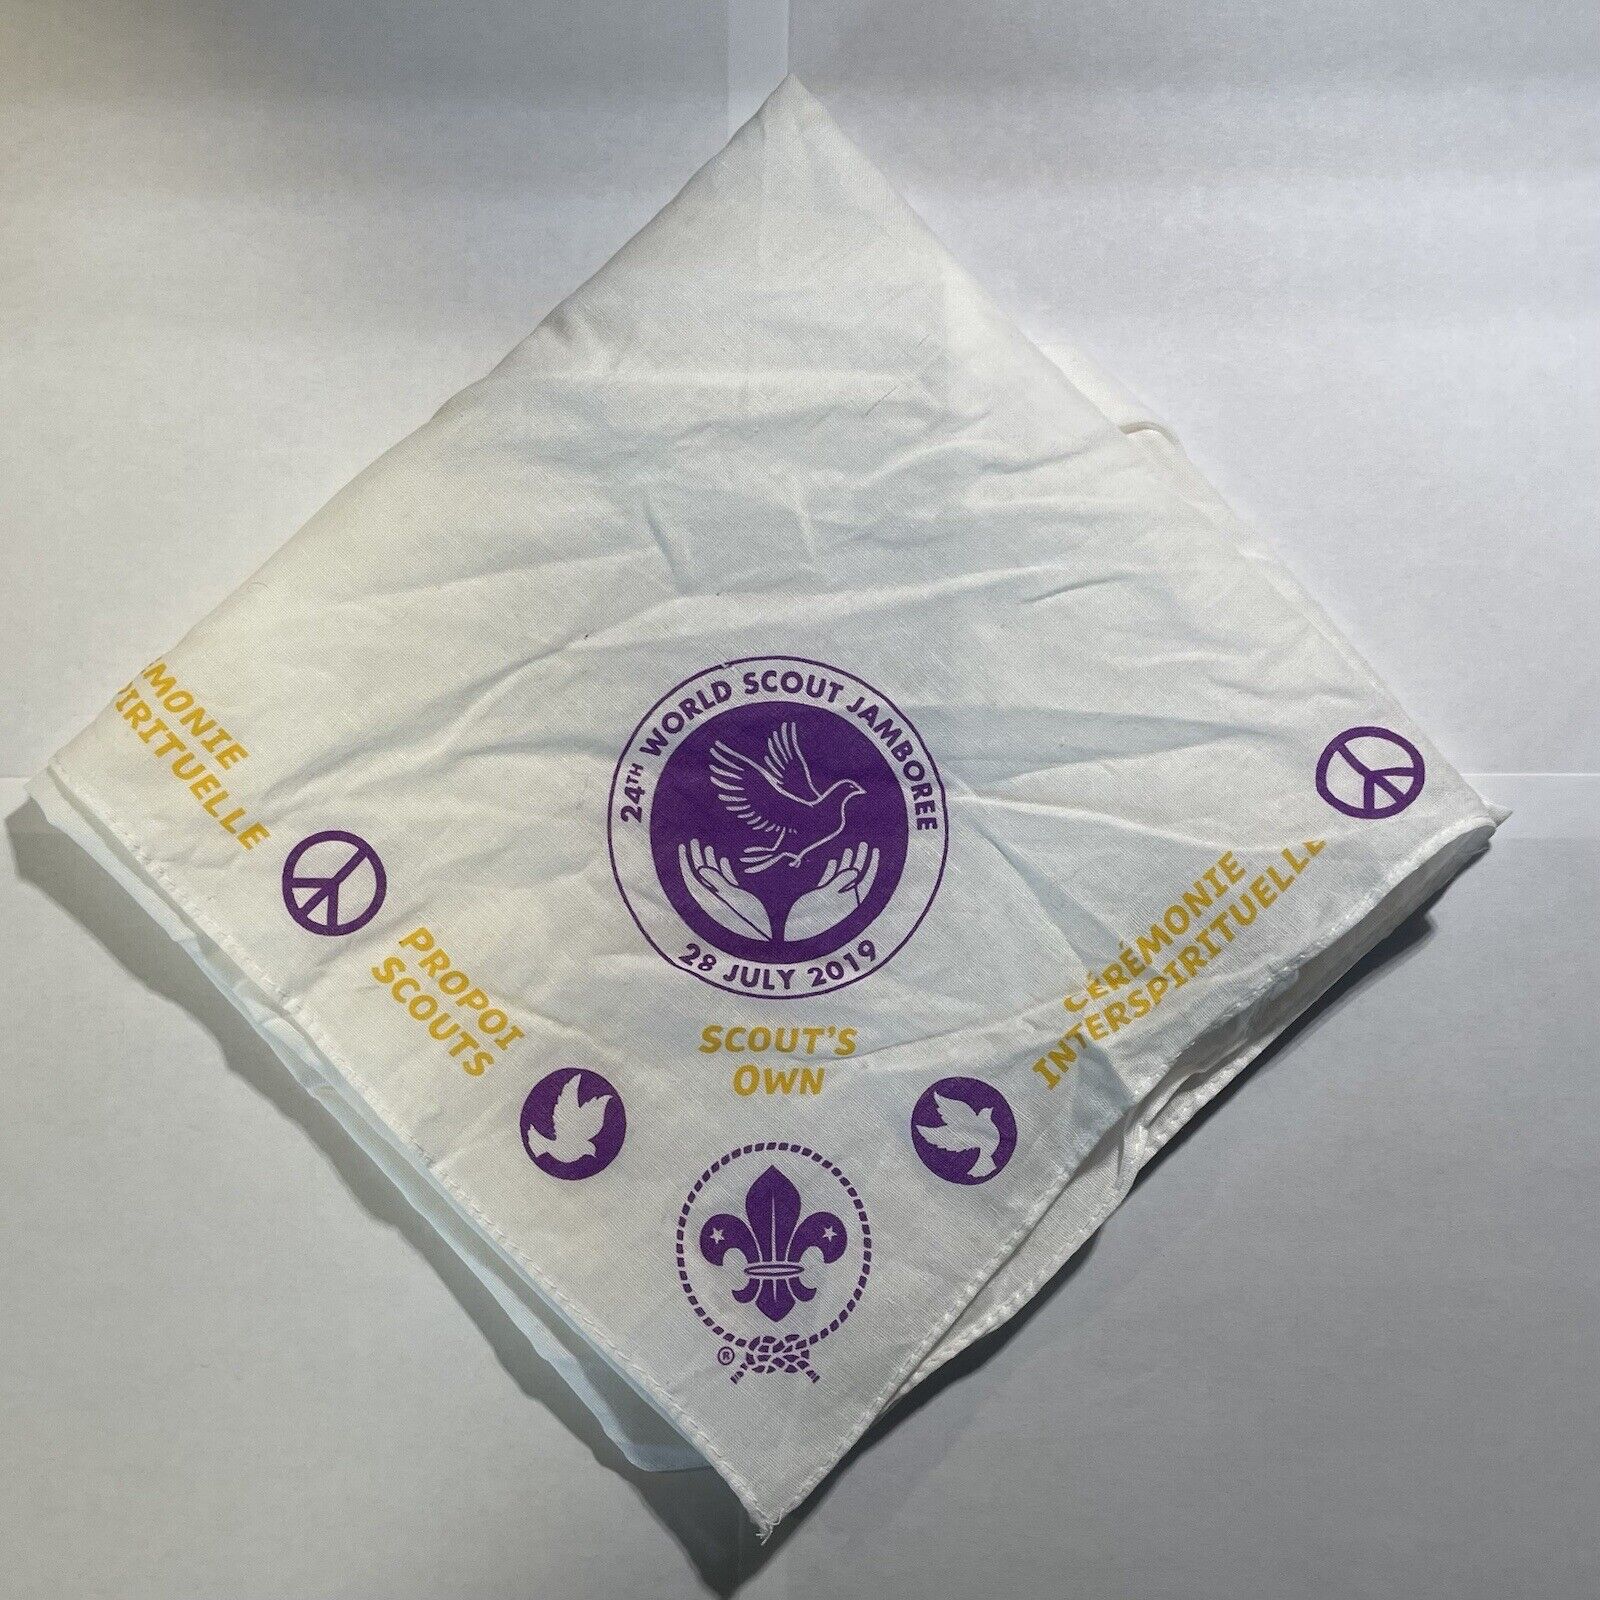 24th world scout jamboree scouts own service neckerchief (used)